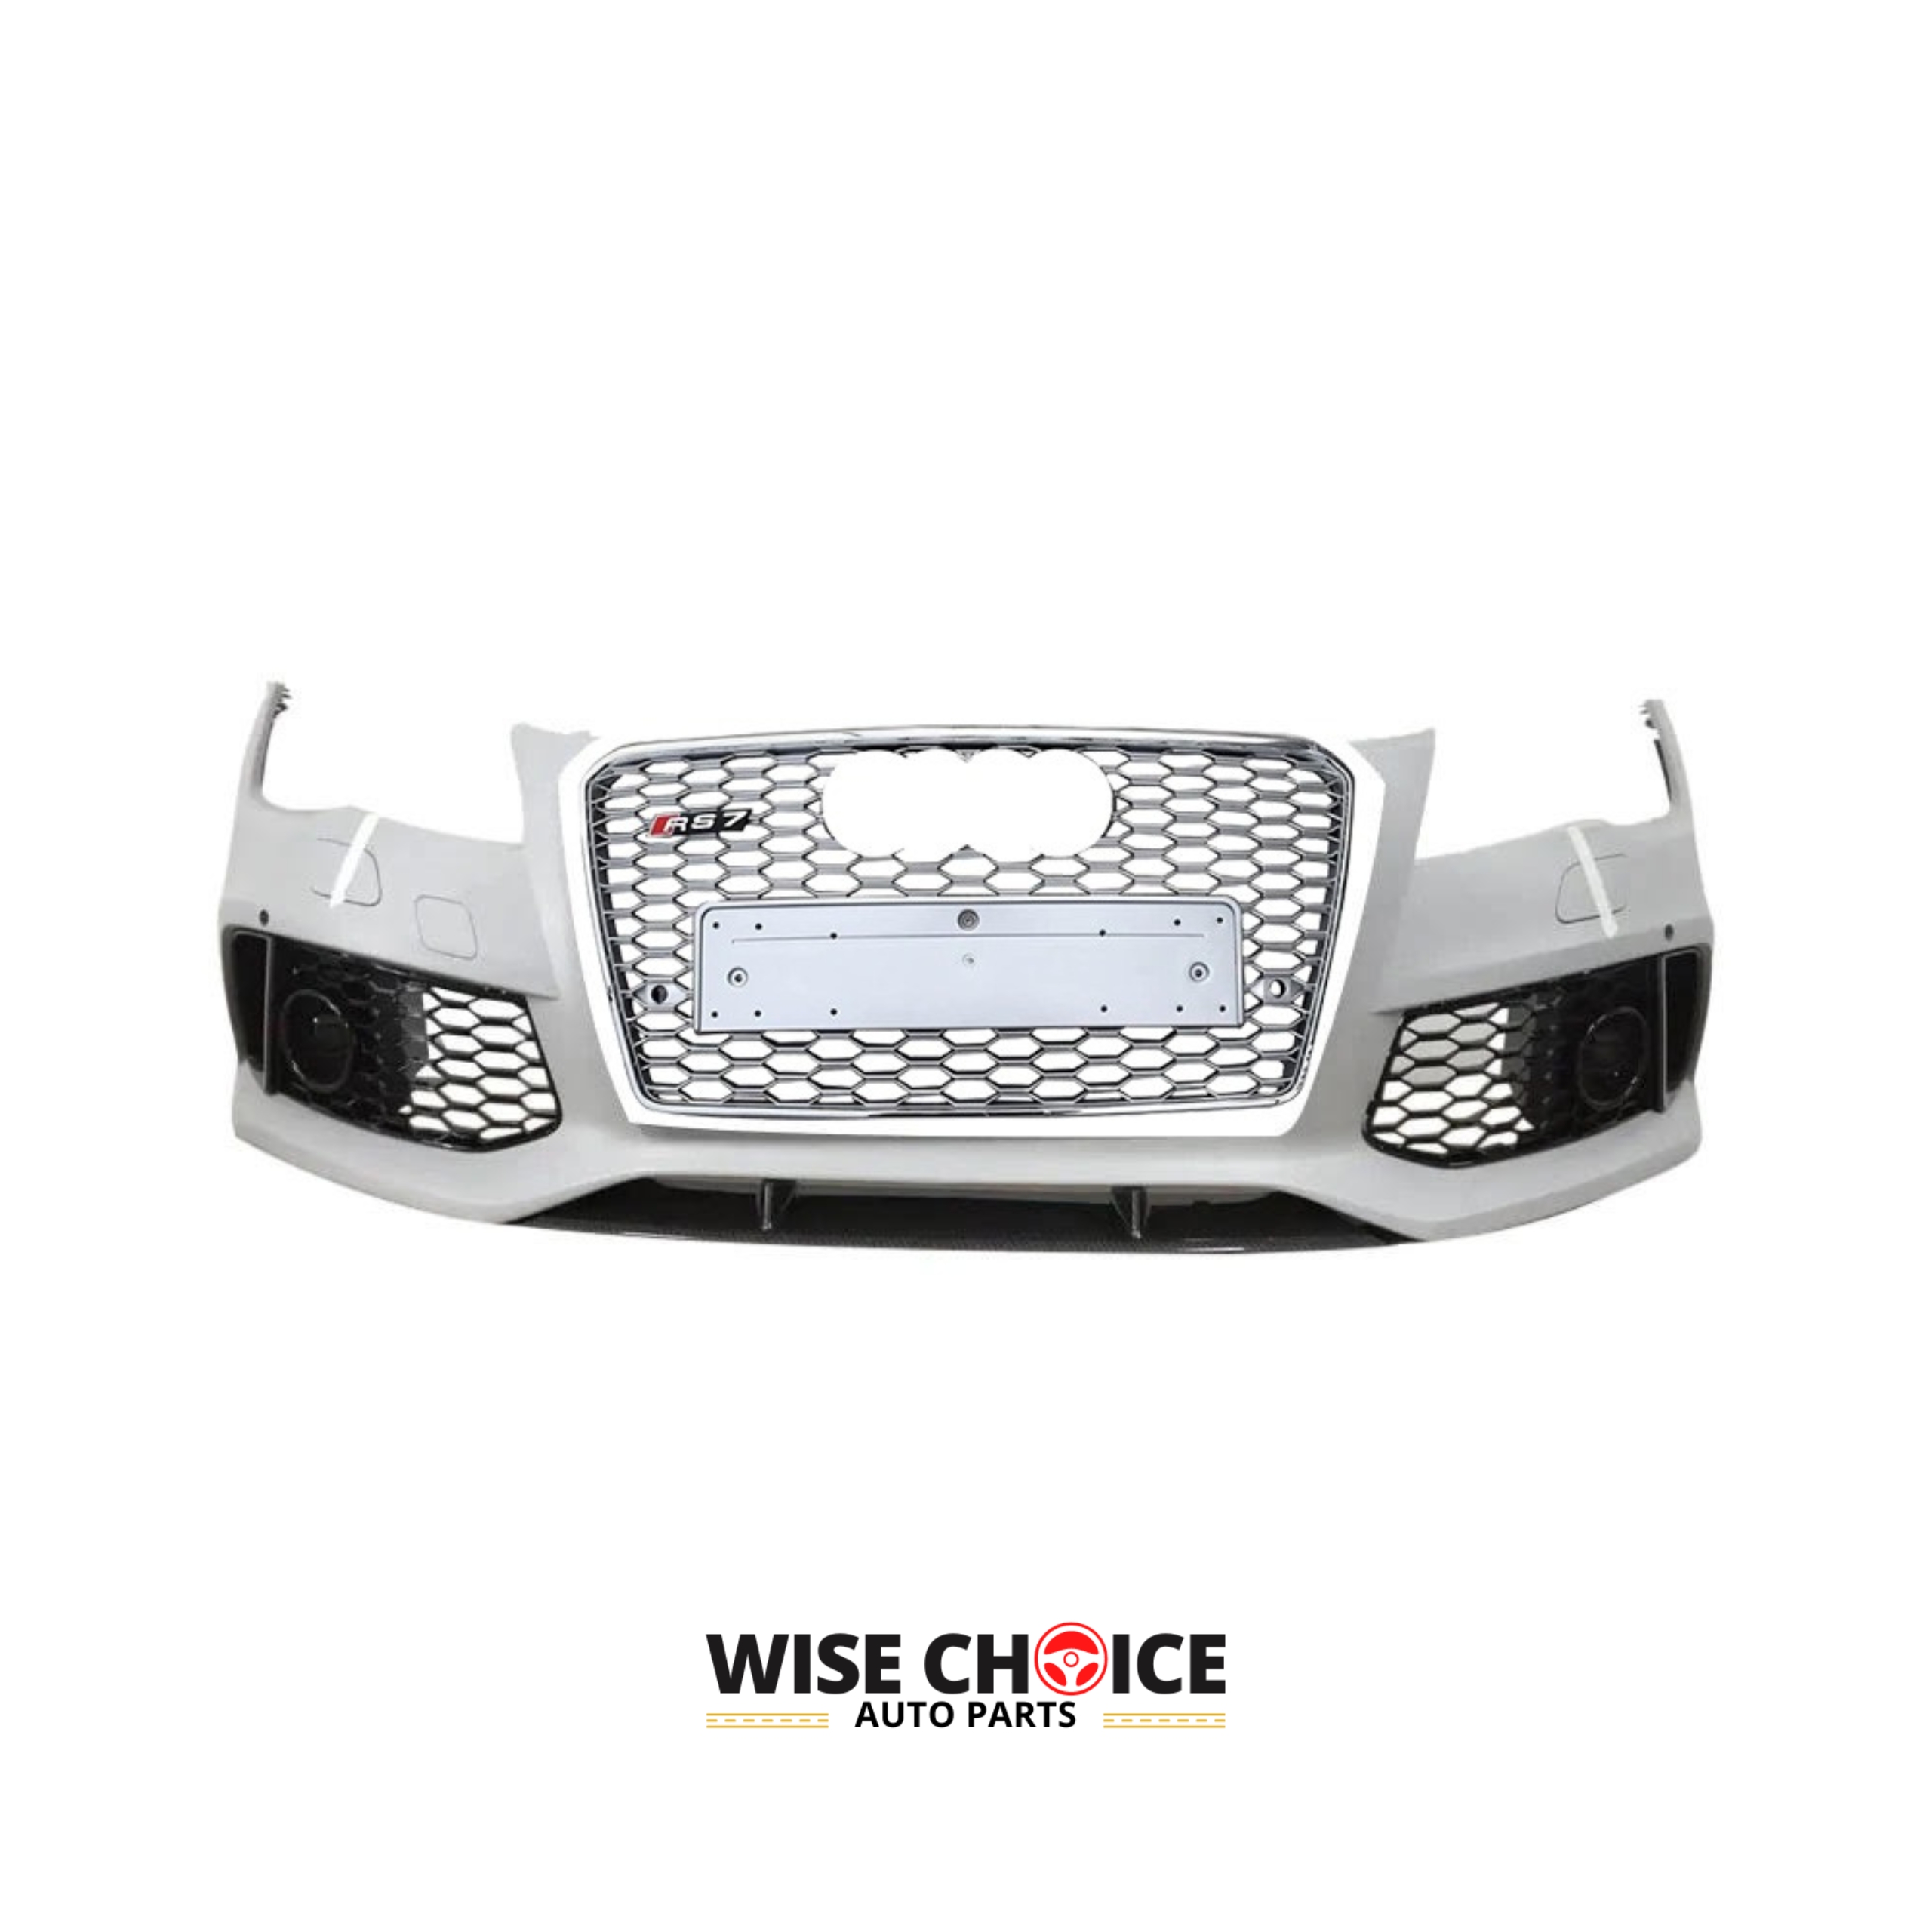 Audi RS7 Front Bumper, primed and ready for installation on C7 A7/S7 models (2009-2015)